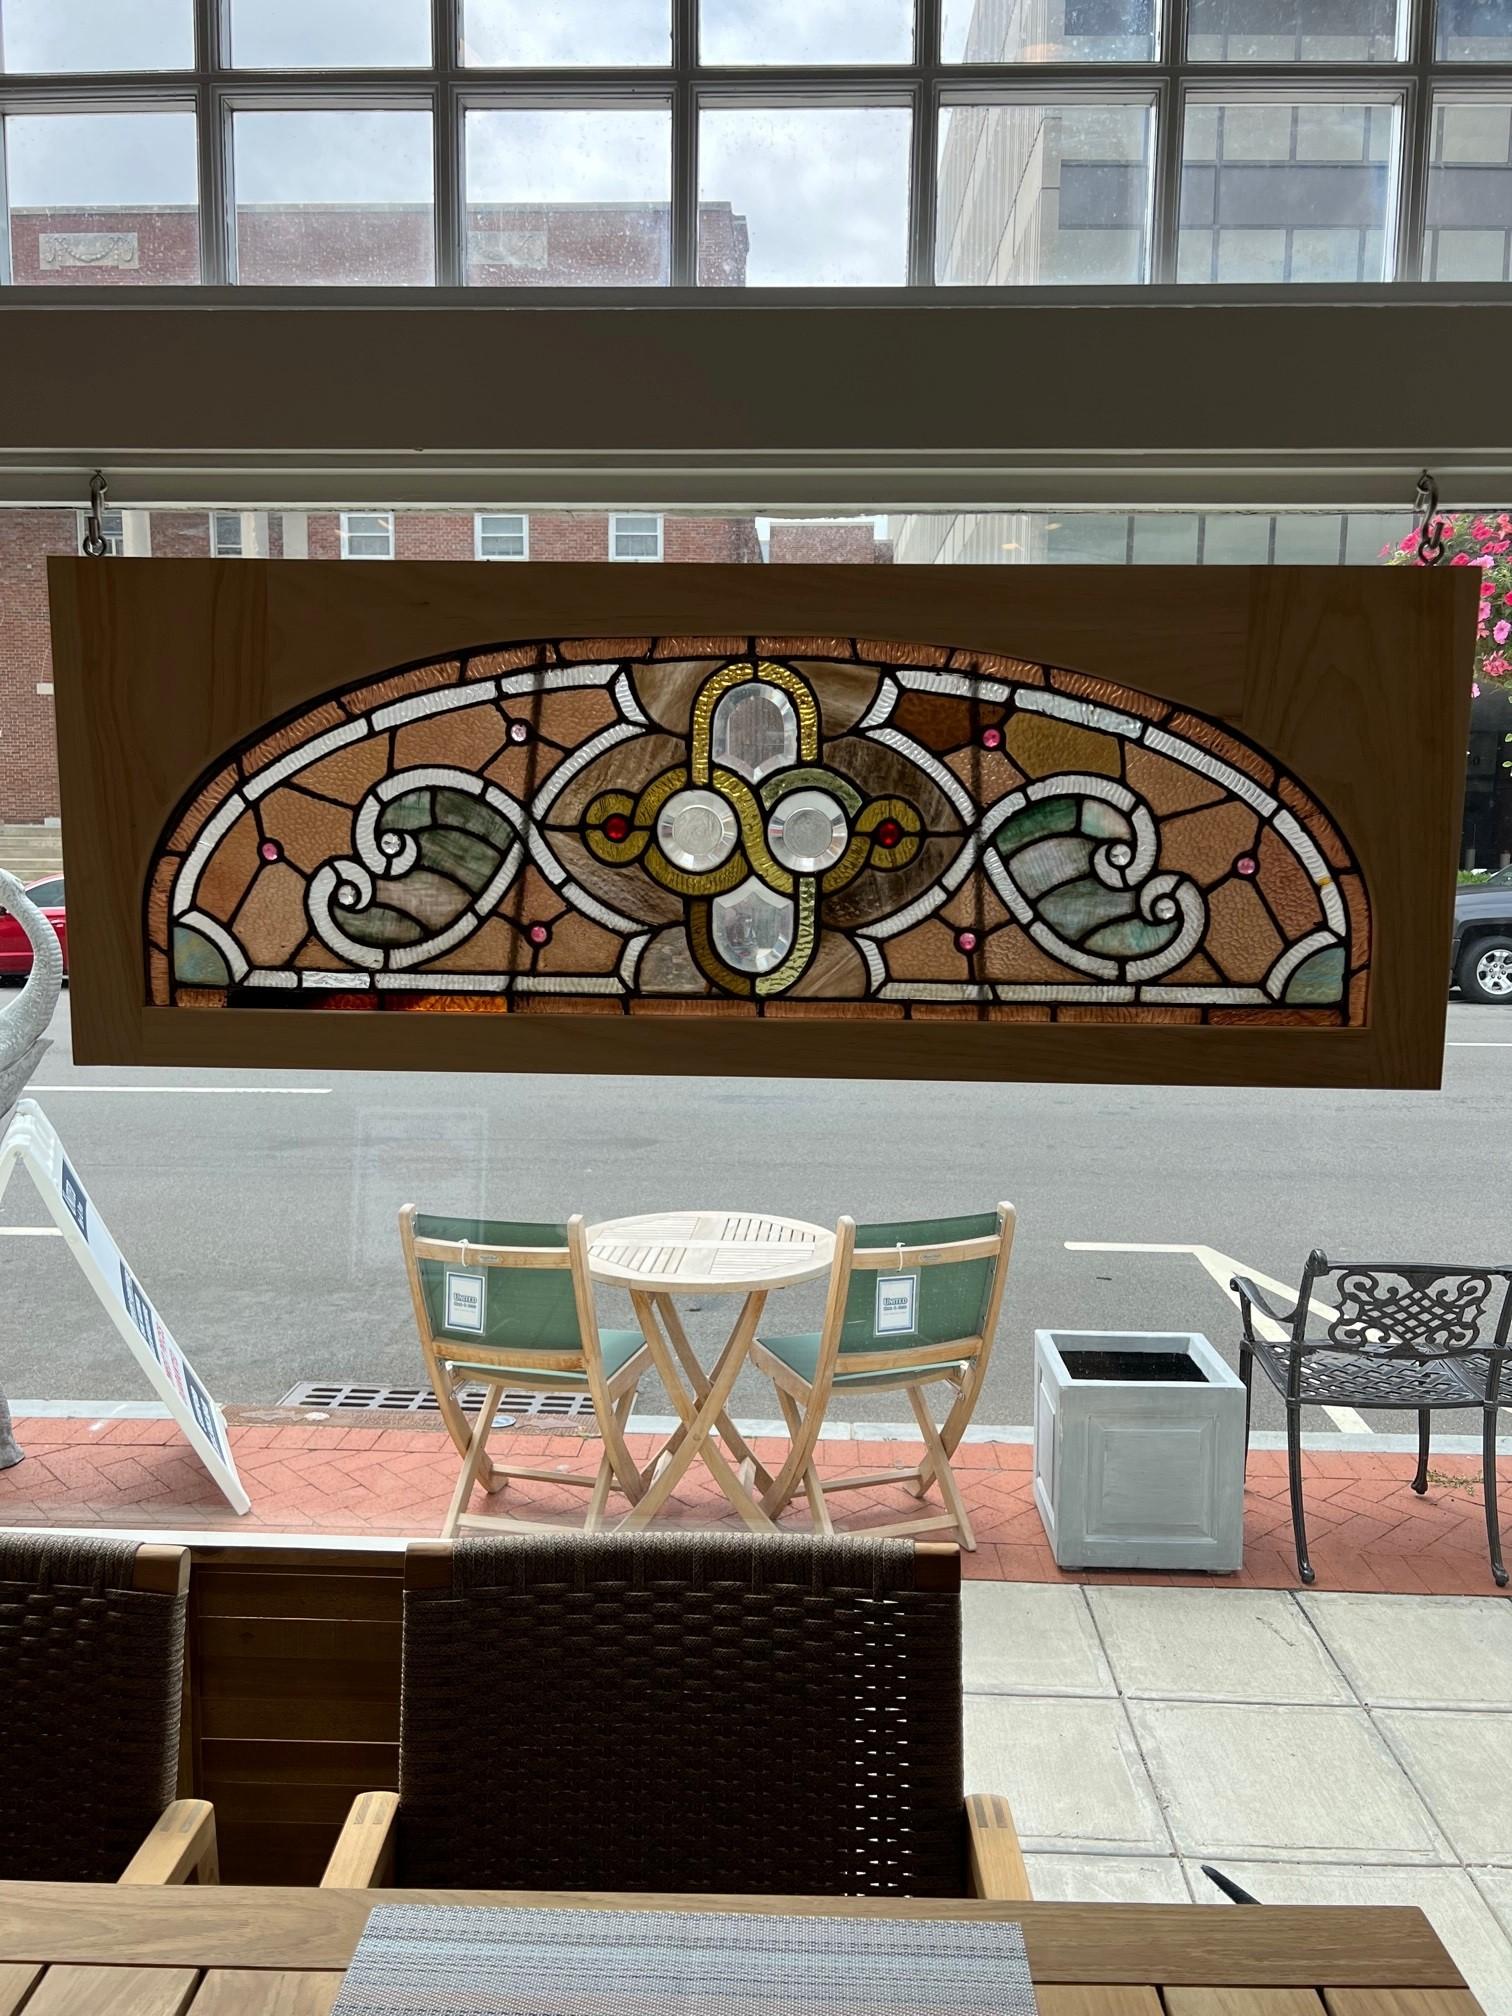 Beautiful antique stained glass arch transom window in a new wood frame. Late 19th century window salvaged from an estate outside Pittsburgh PA. This is a combination window with both stained and beveled glass panels 
This is one of three stained